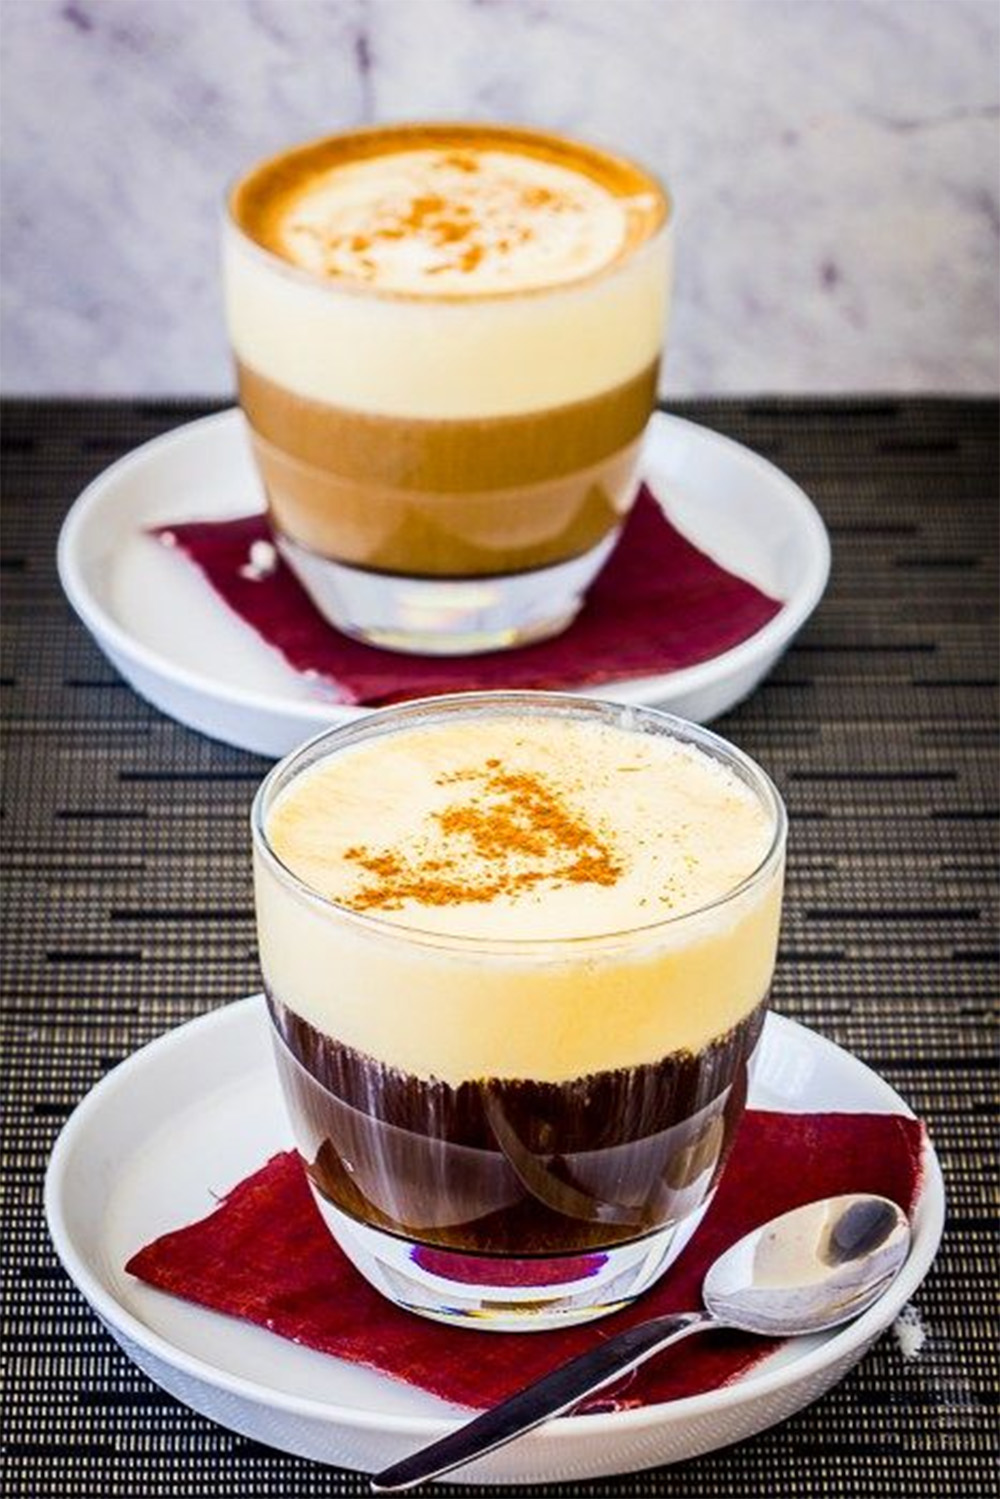 While egg and coffee don't sound like they should go together, this Vietnamese specialty proves it can be done. The whisked egg yolks are mixed with condensed milk and then poured over espresso, making it more of a dessert. The perfect way to end a meal!